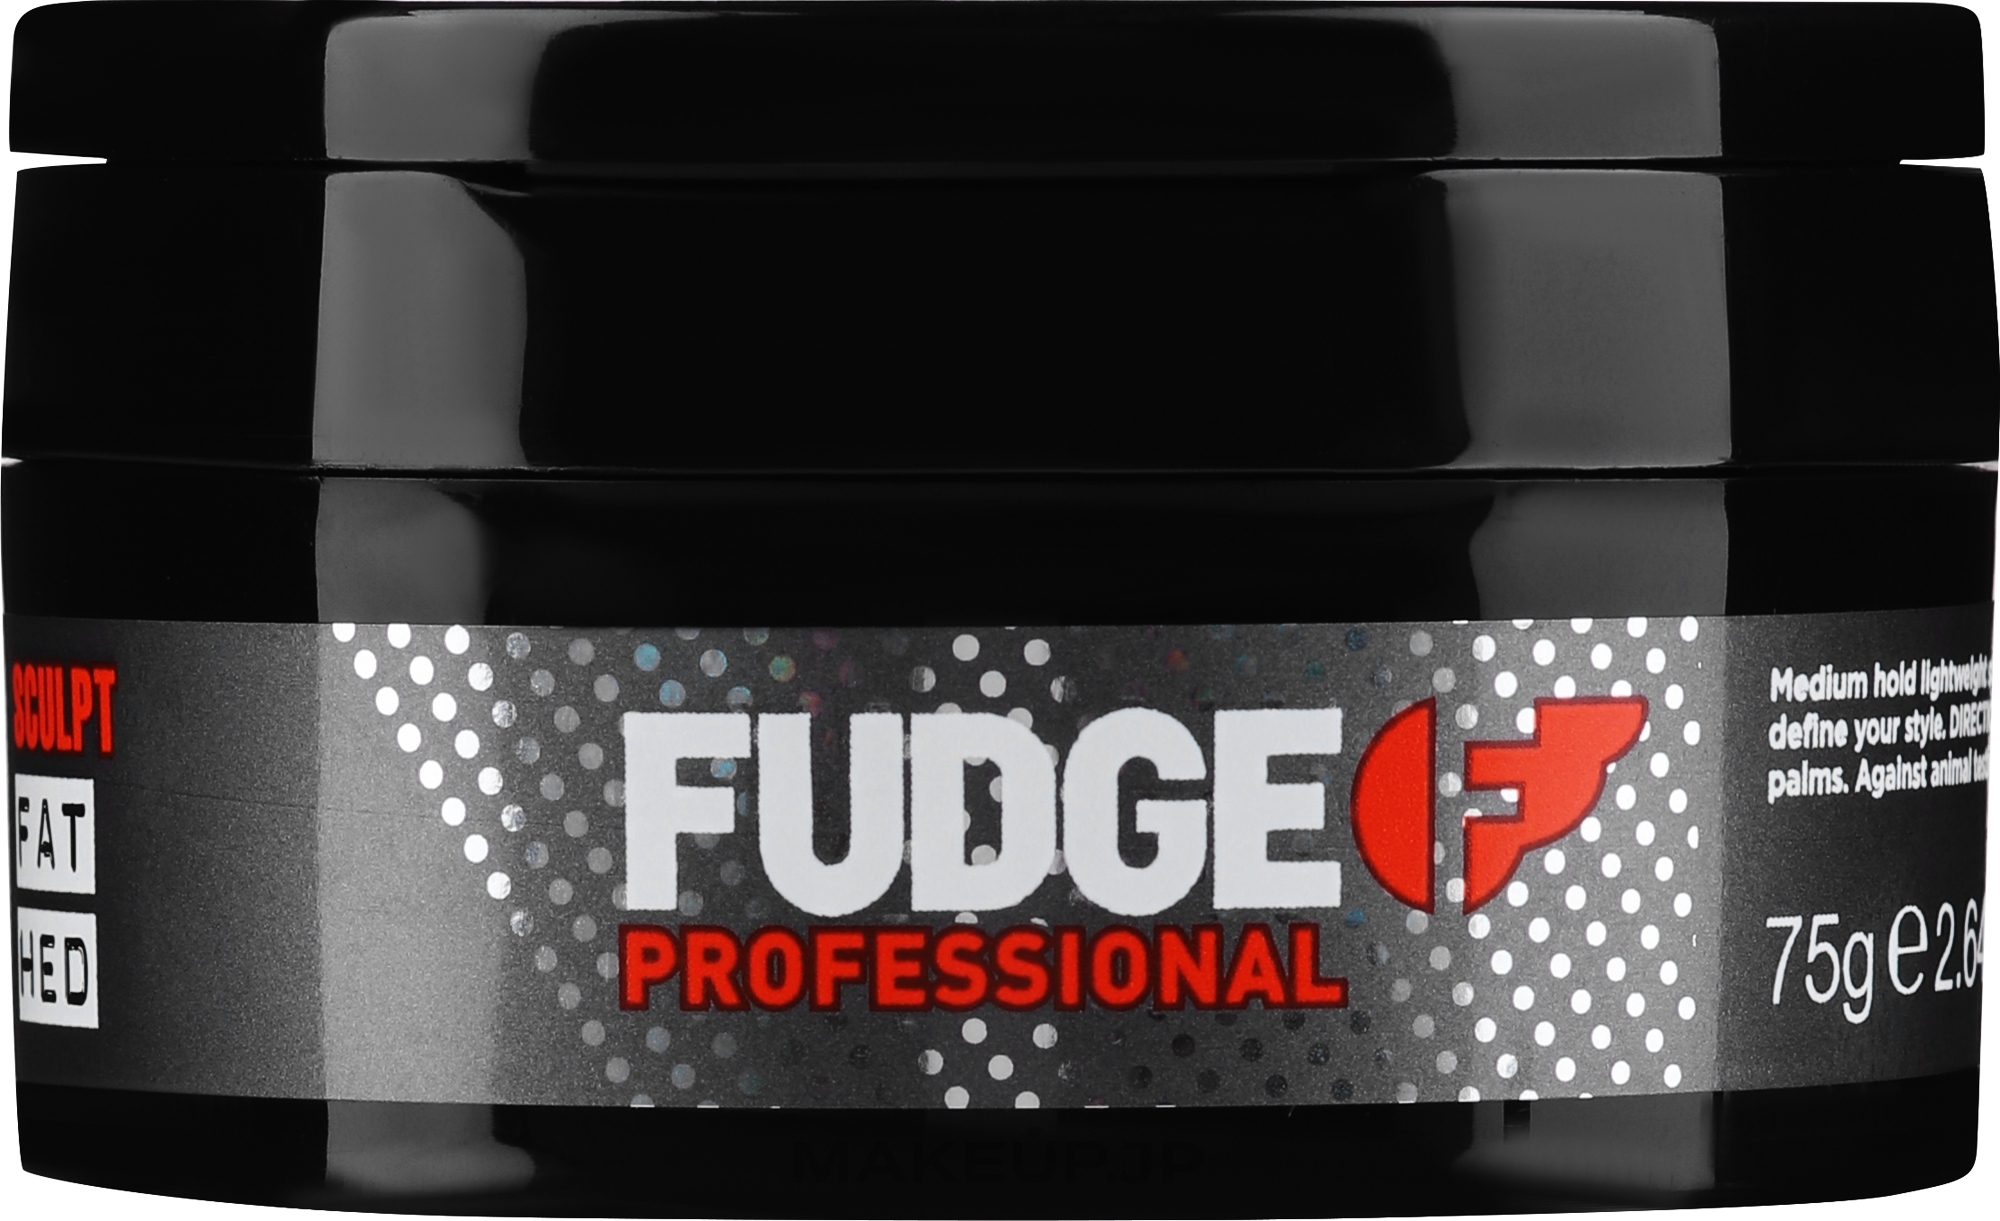 Strong Hold Texturizing Paste - Fudge Styling Fat Hed — photo 75 g